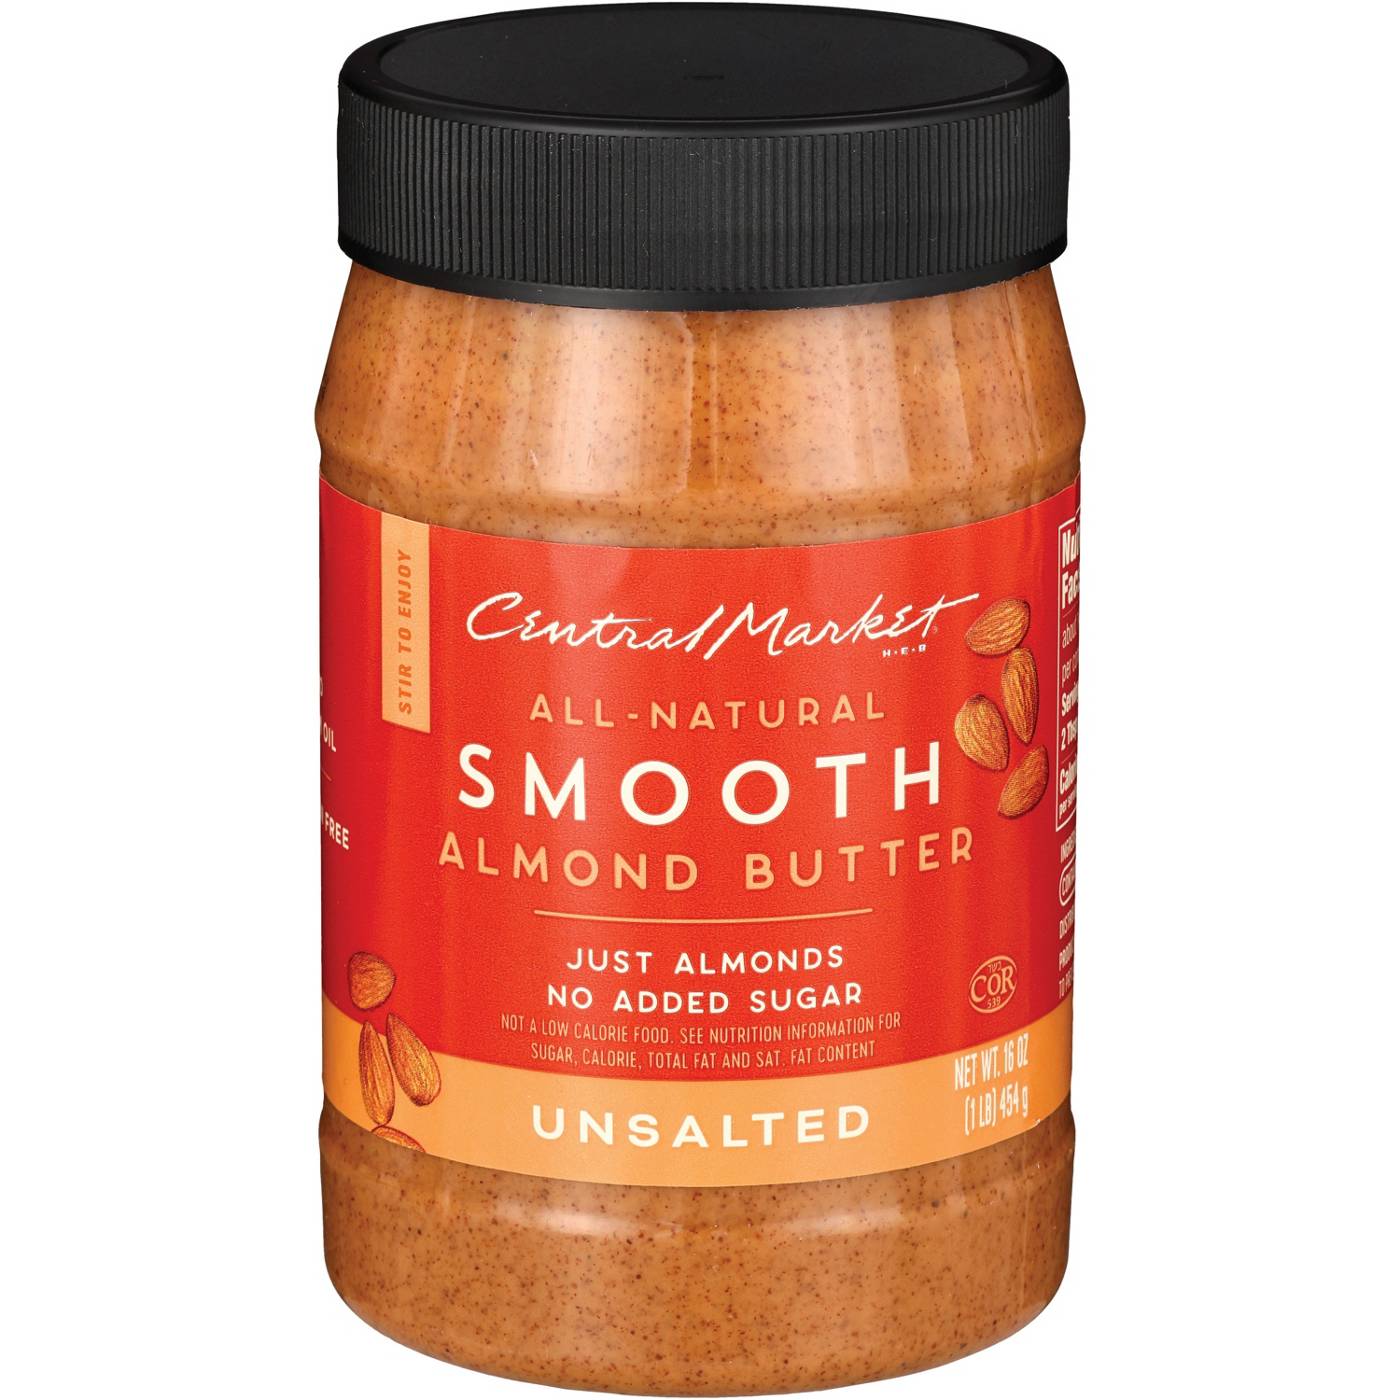 Central Market All-Natural Smooth Almond Butter – Unsalted; image 2 of 2